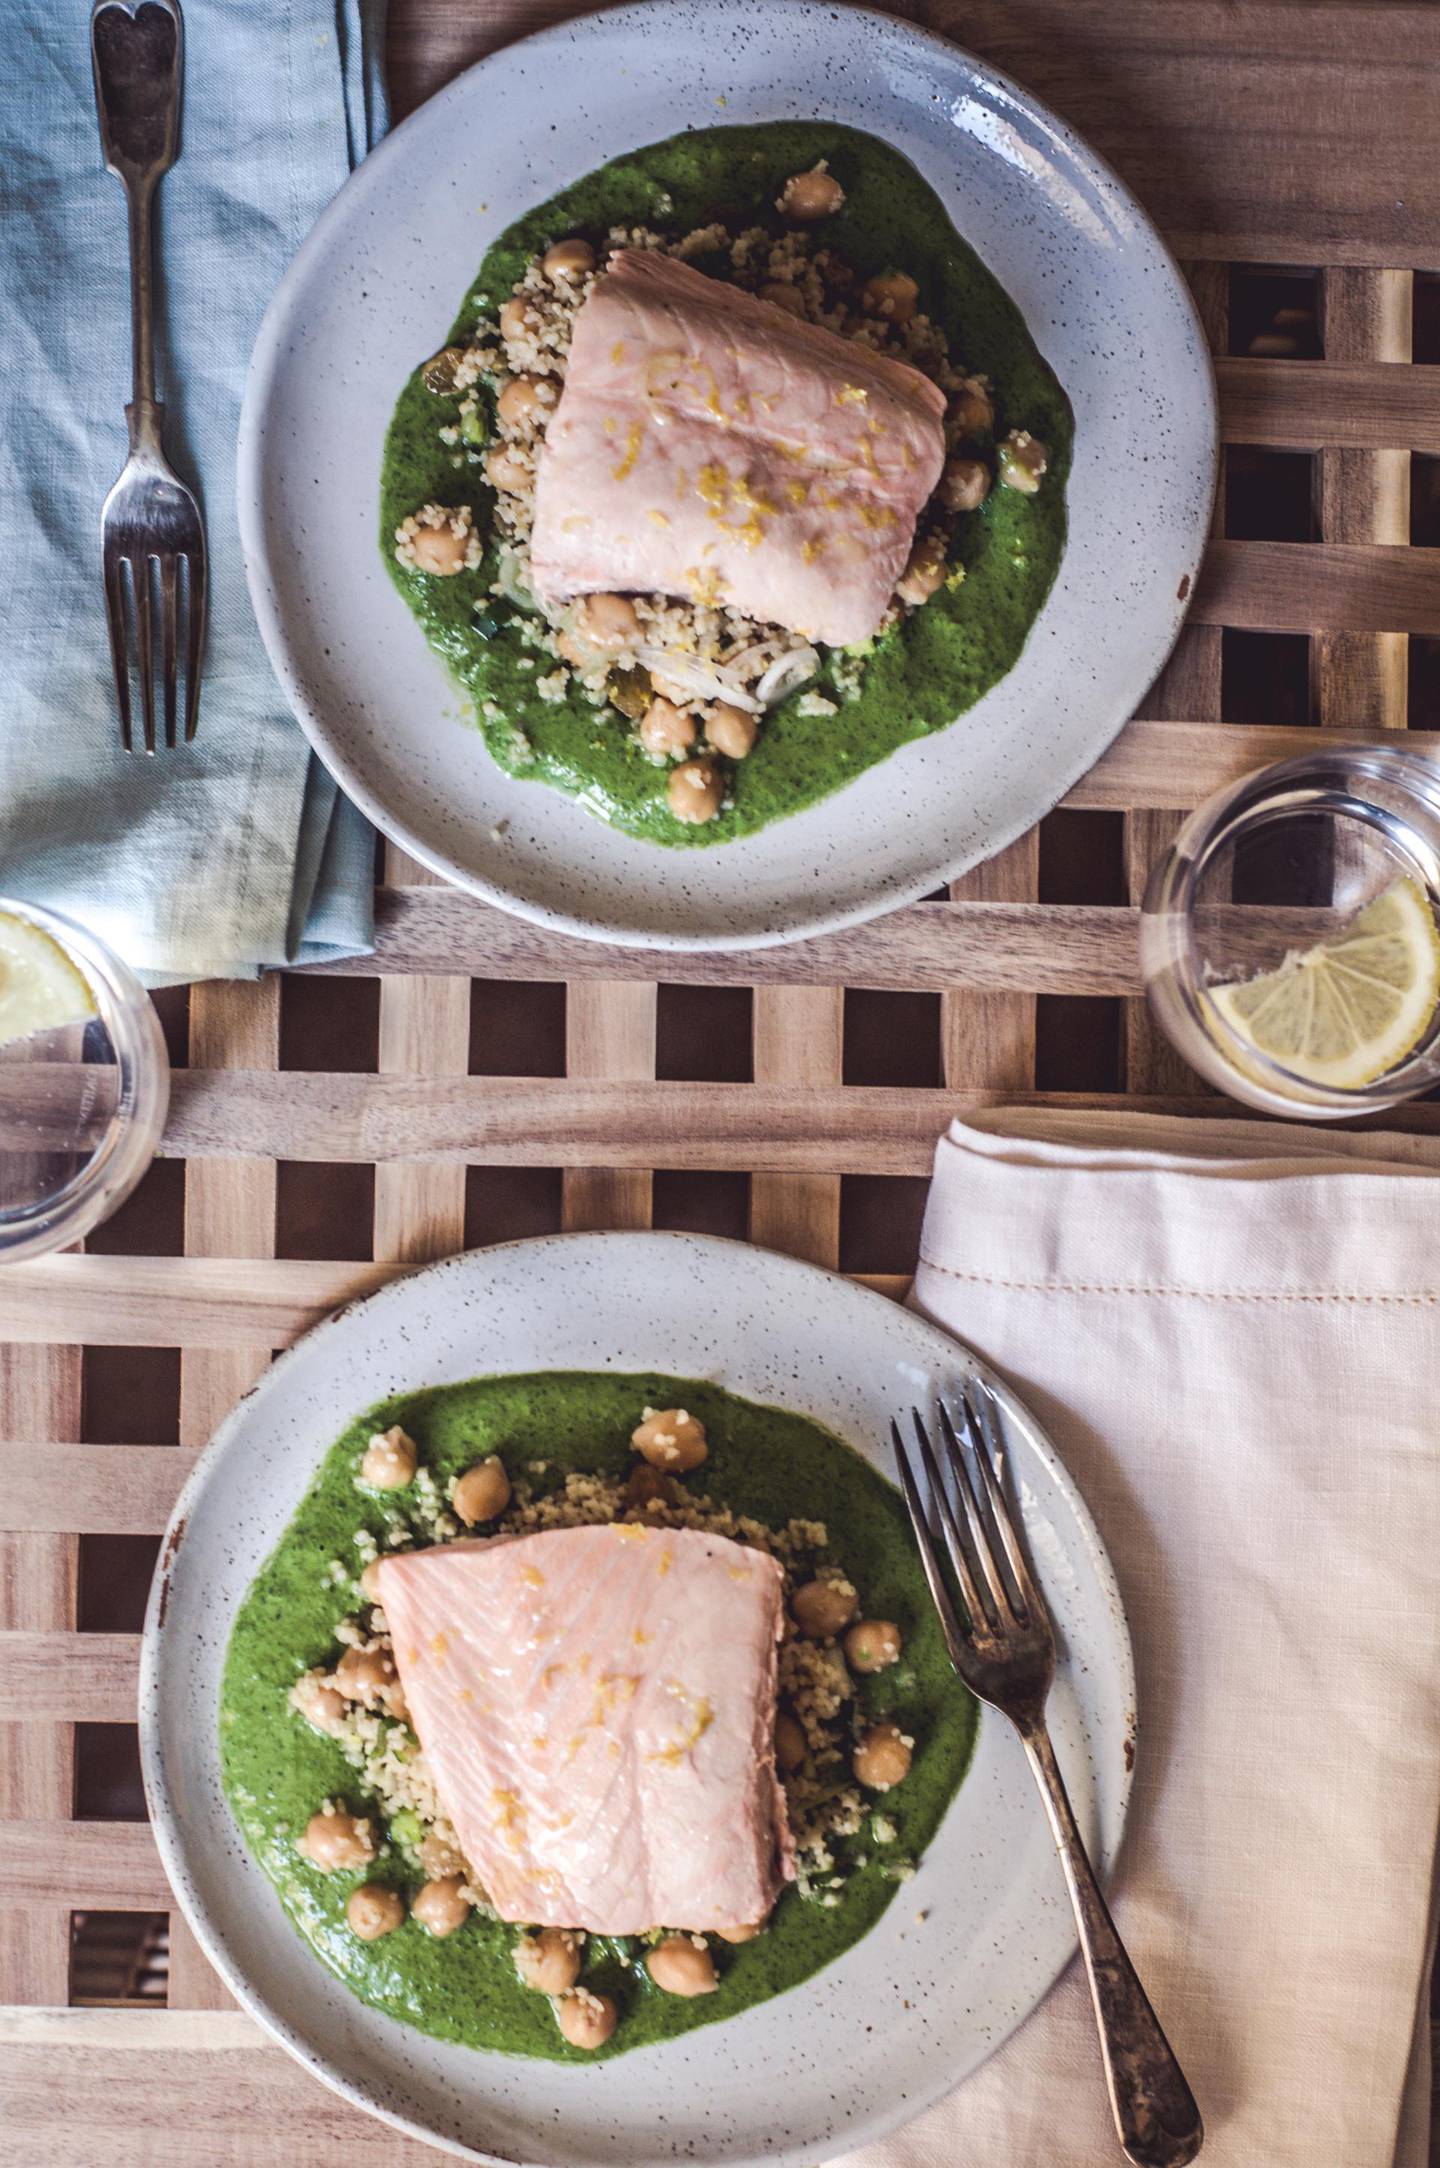 Poached salmon with spiced couscous and herb-yogurt dressing